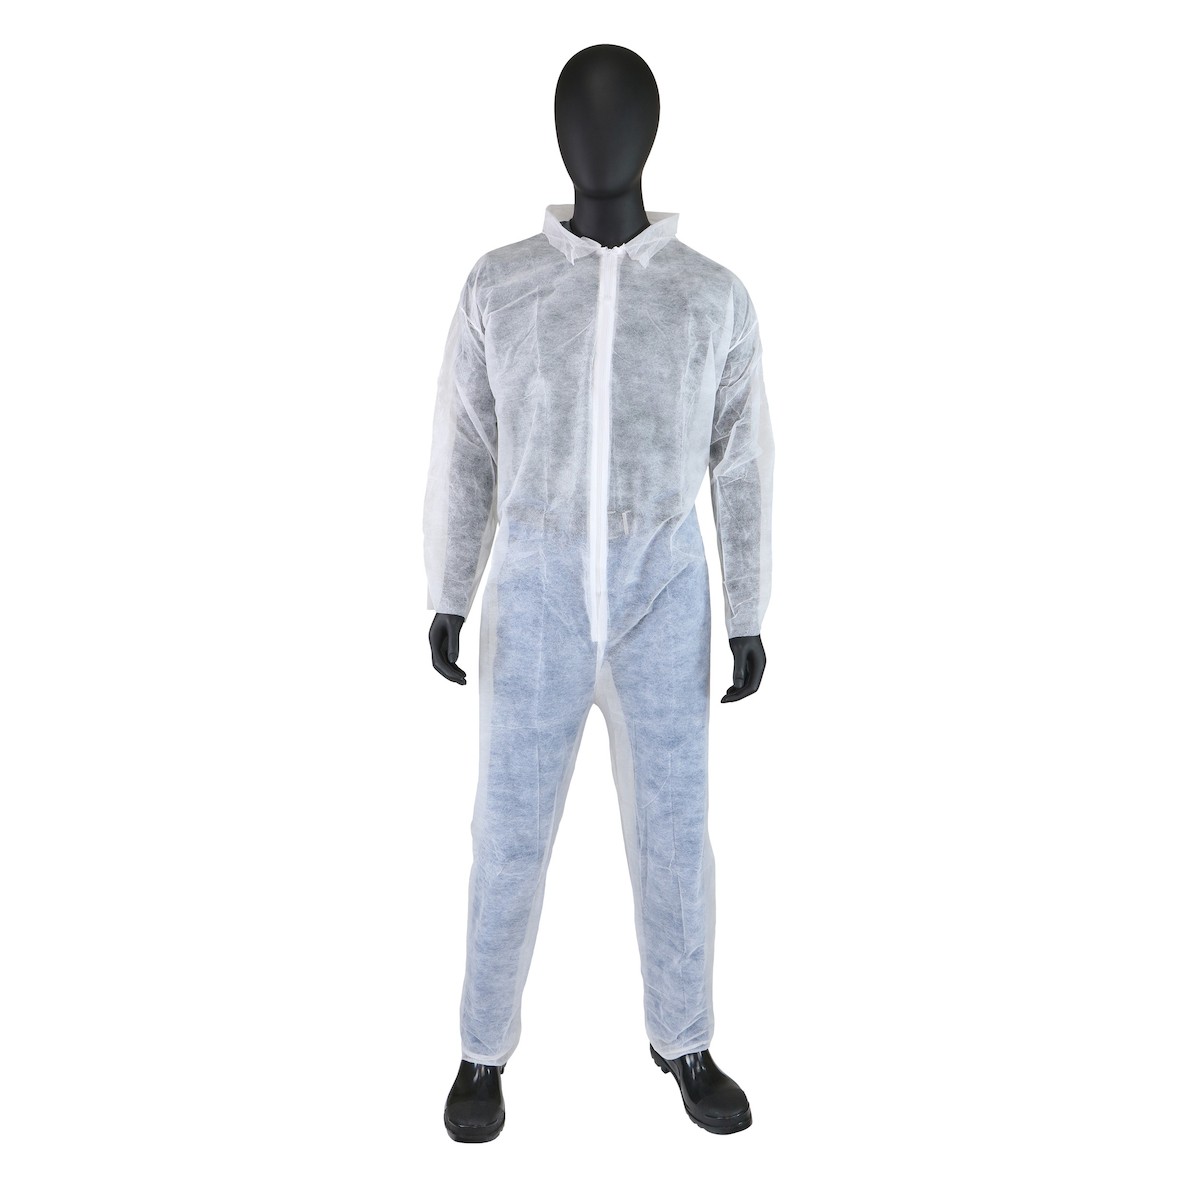 Coverall SBPP Zip Front Collar Elastic Wrist and Ankle White XLG 25/CS